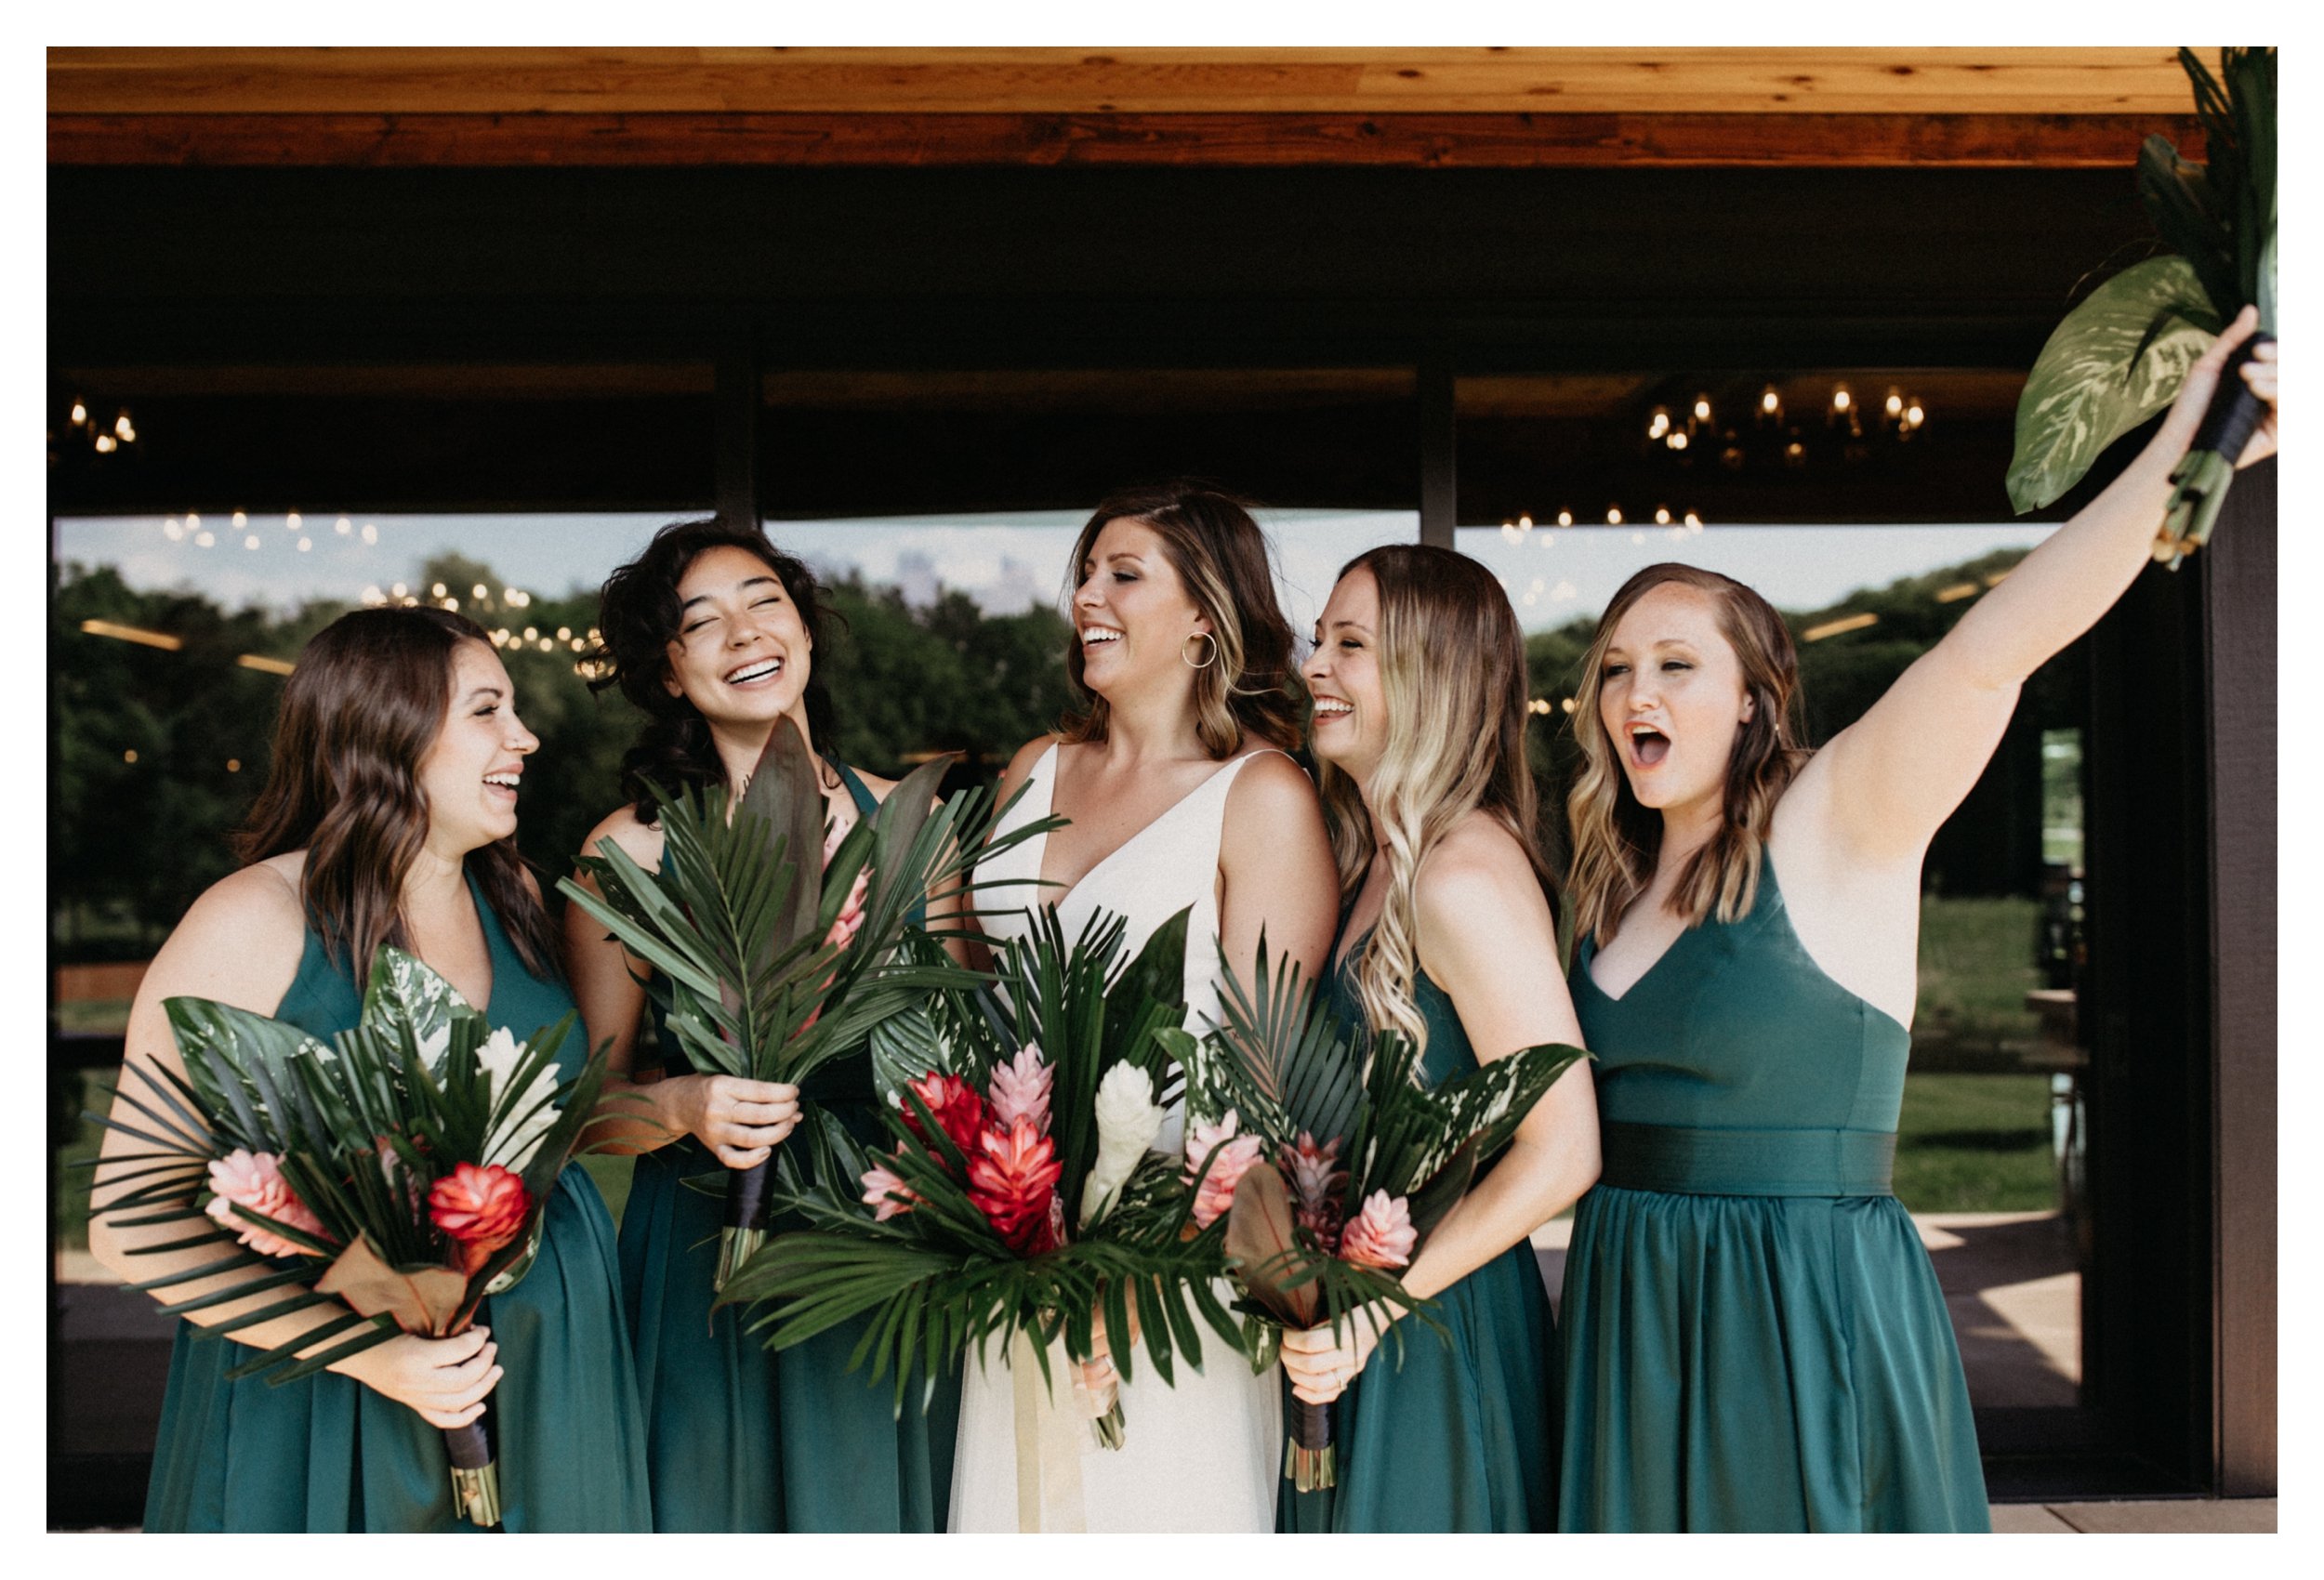 Bride and bridesmaid laughing and cheering at 7 Vines Minnesota winery wedding